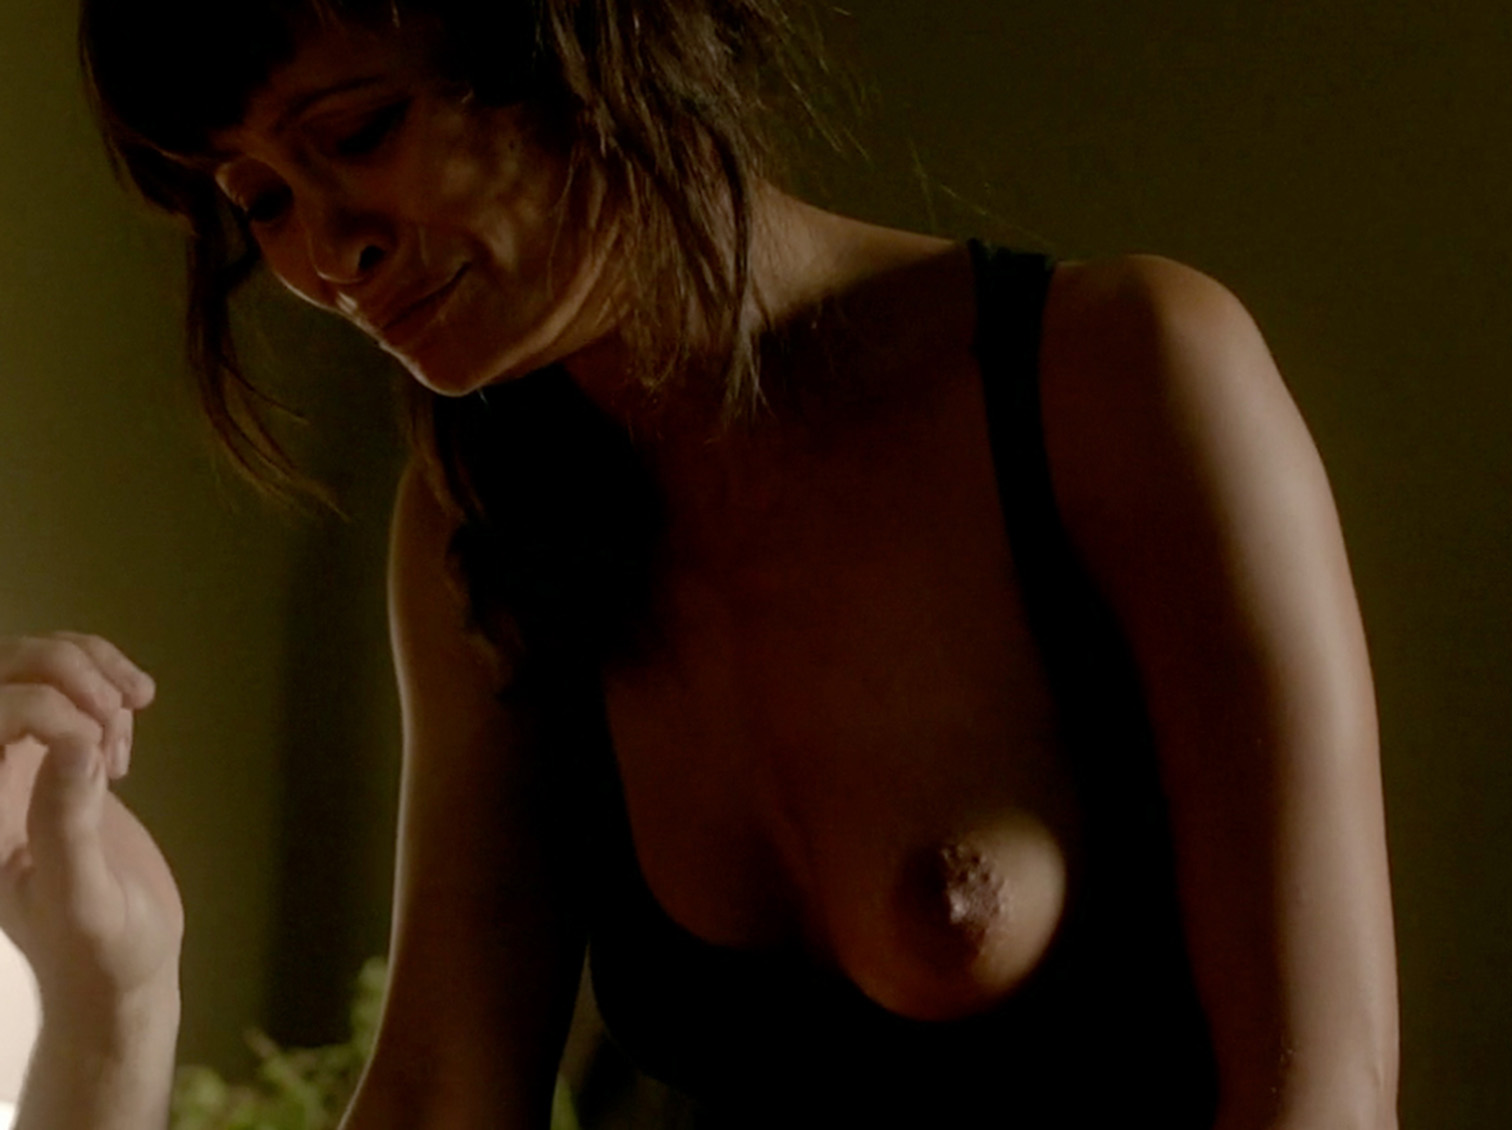 Thandie Newton ("Mission Impossible II") Celebrity Nude Cent